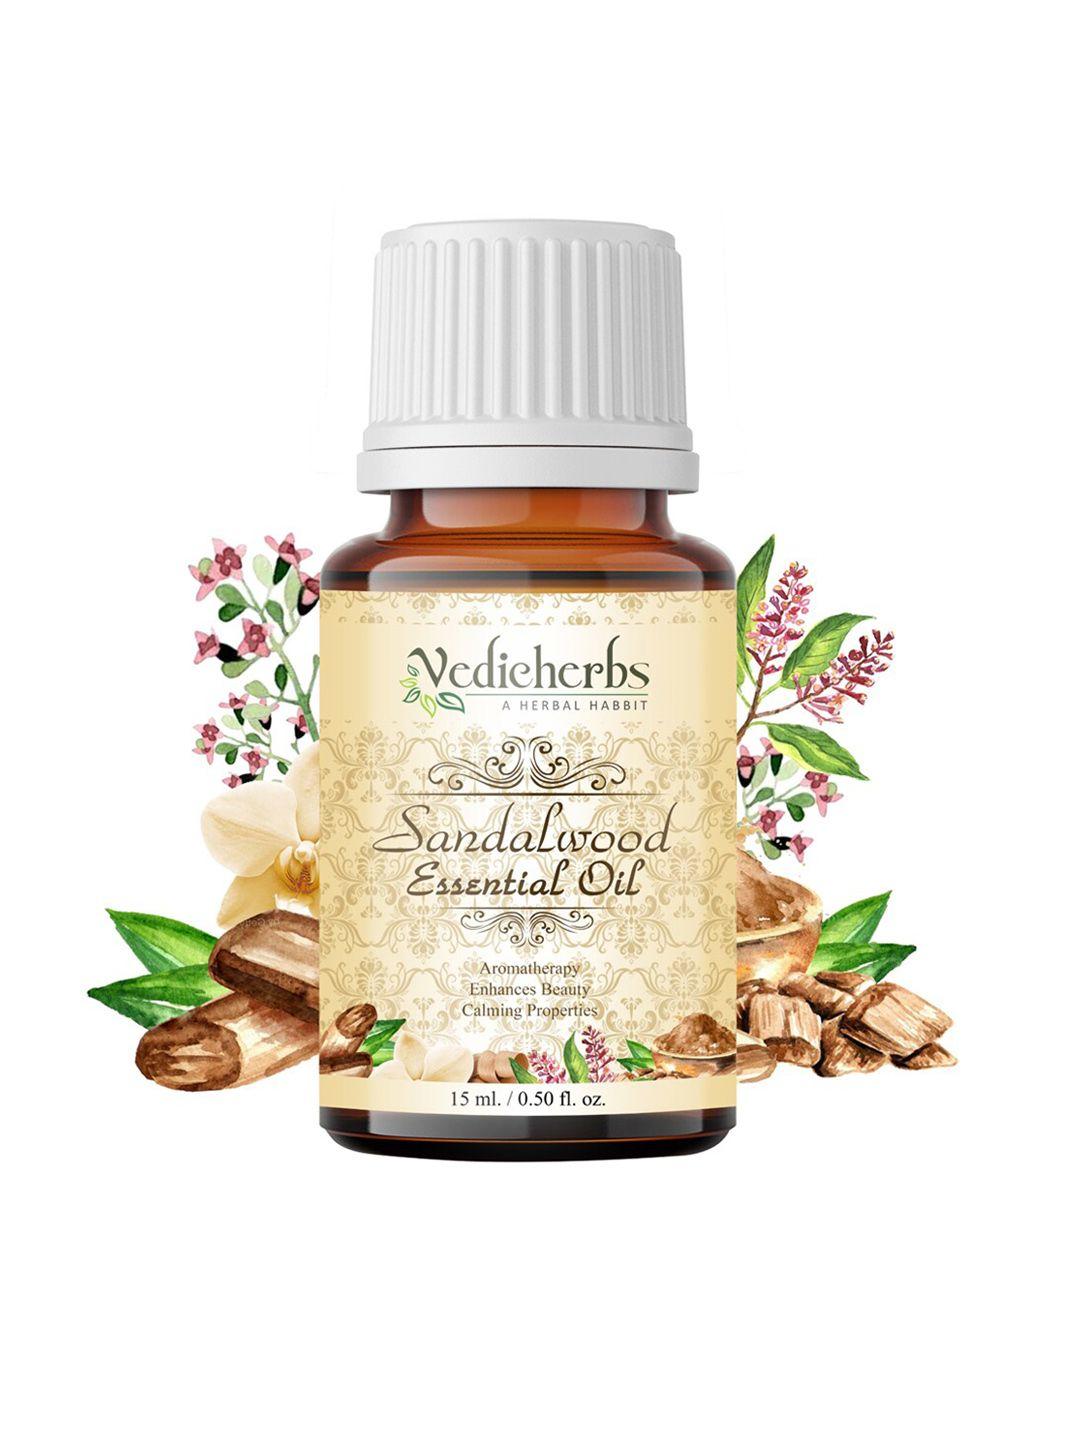 vedicherbs sandalwood essential oil for relaxing aromatherapy - 15ml